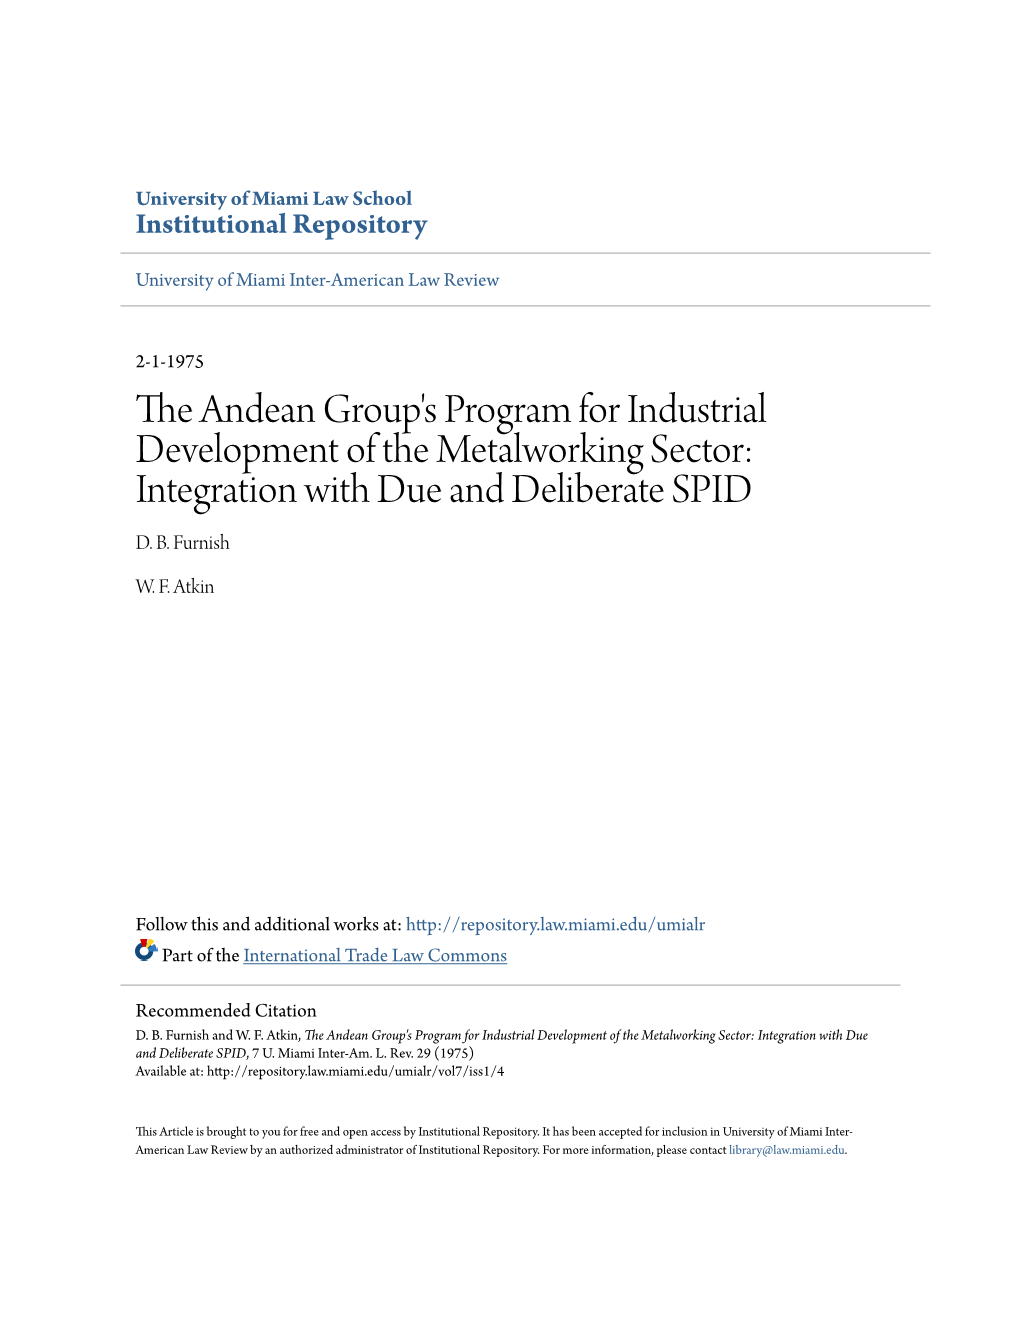 The Andean Group's Program for Industrial Development of the Metalworking Sector: Integration with Due and Deliberate SPID D